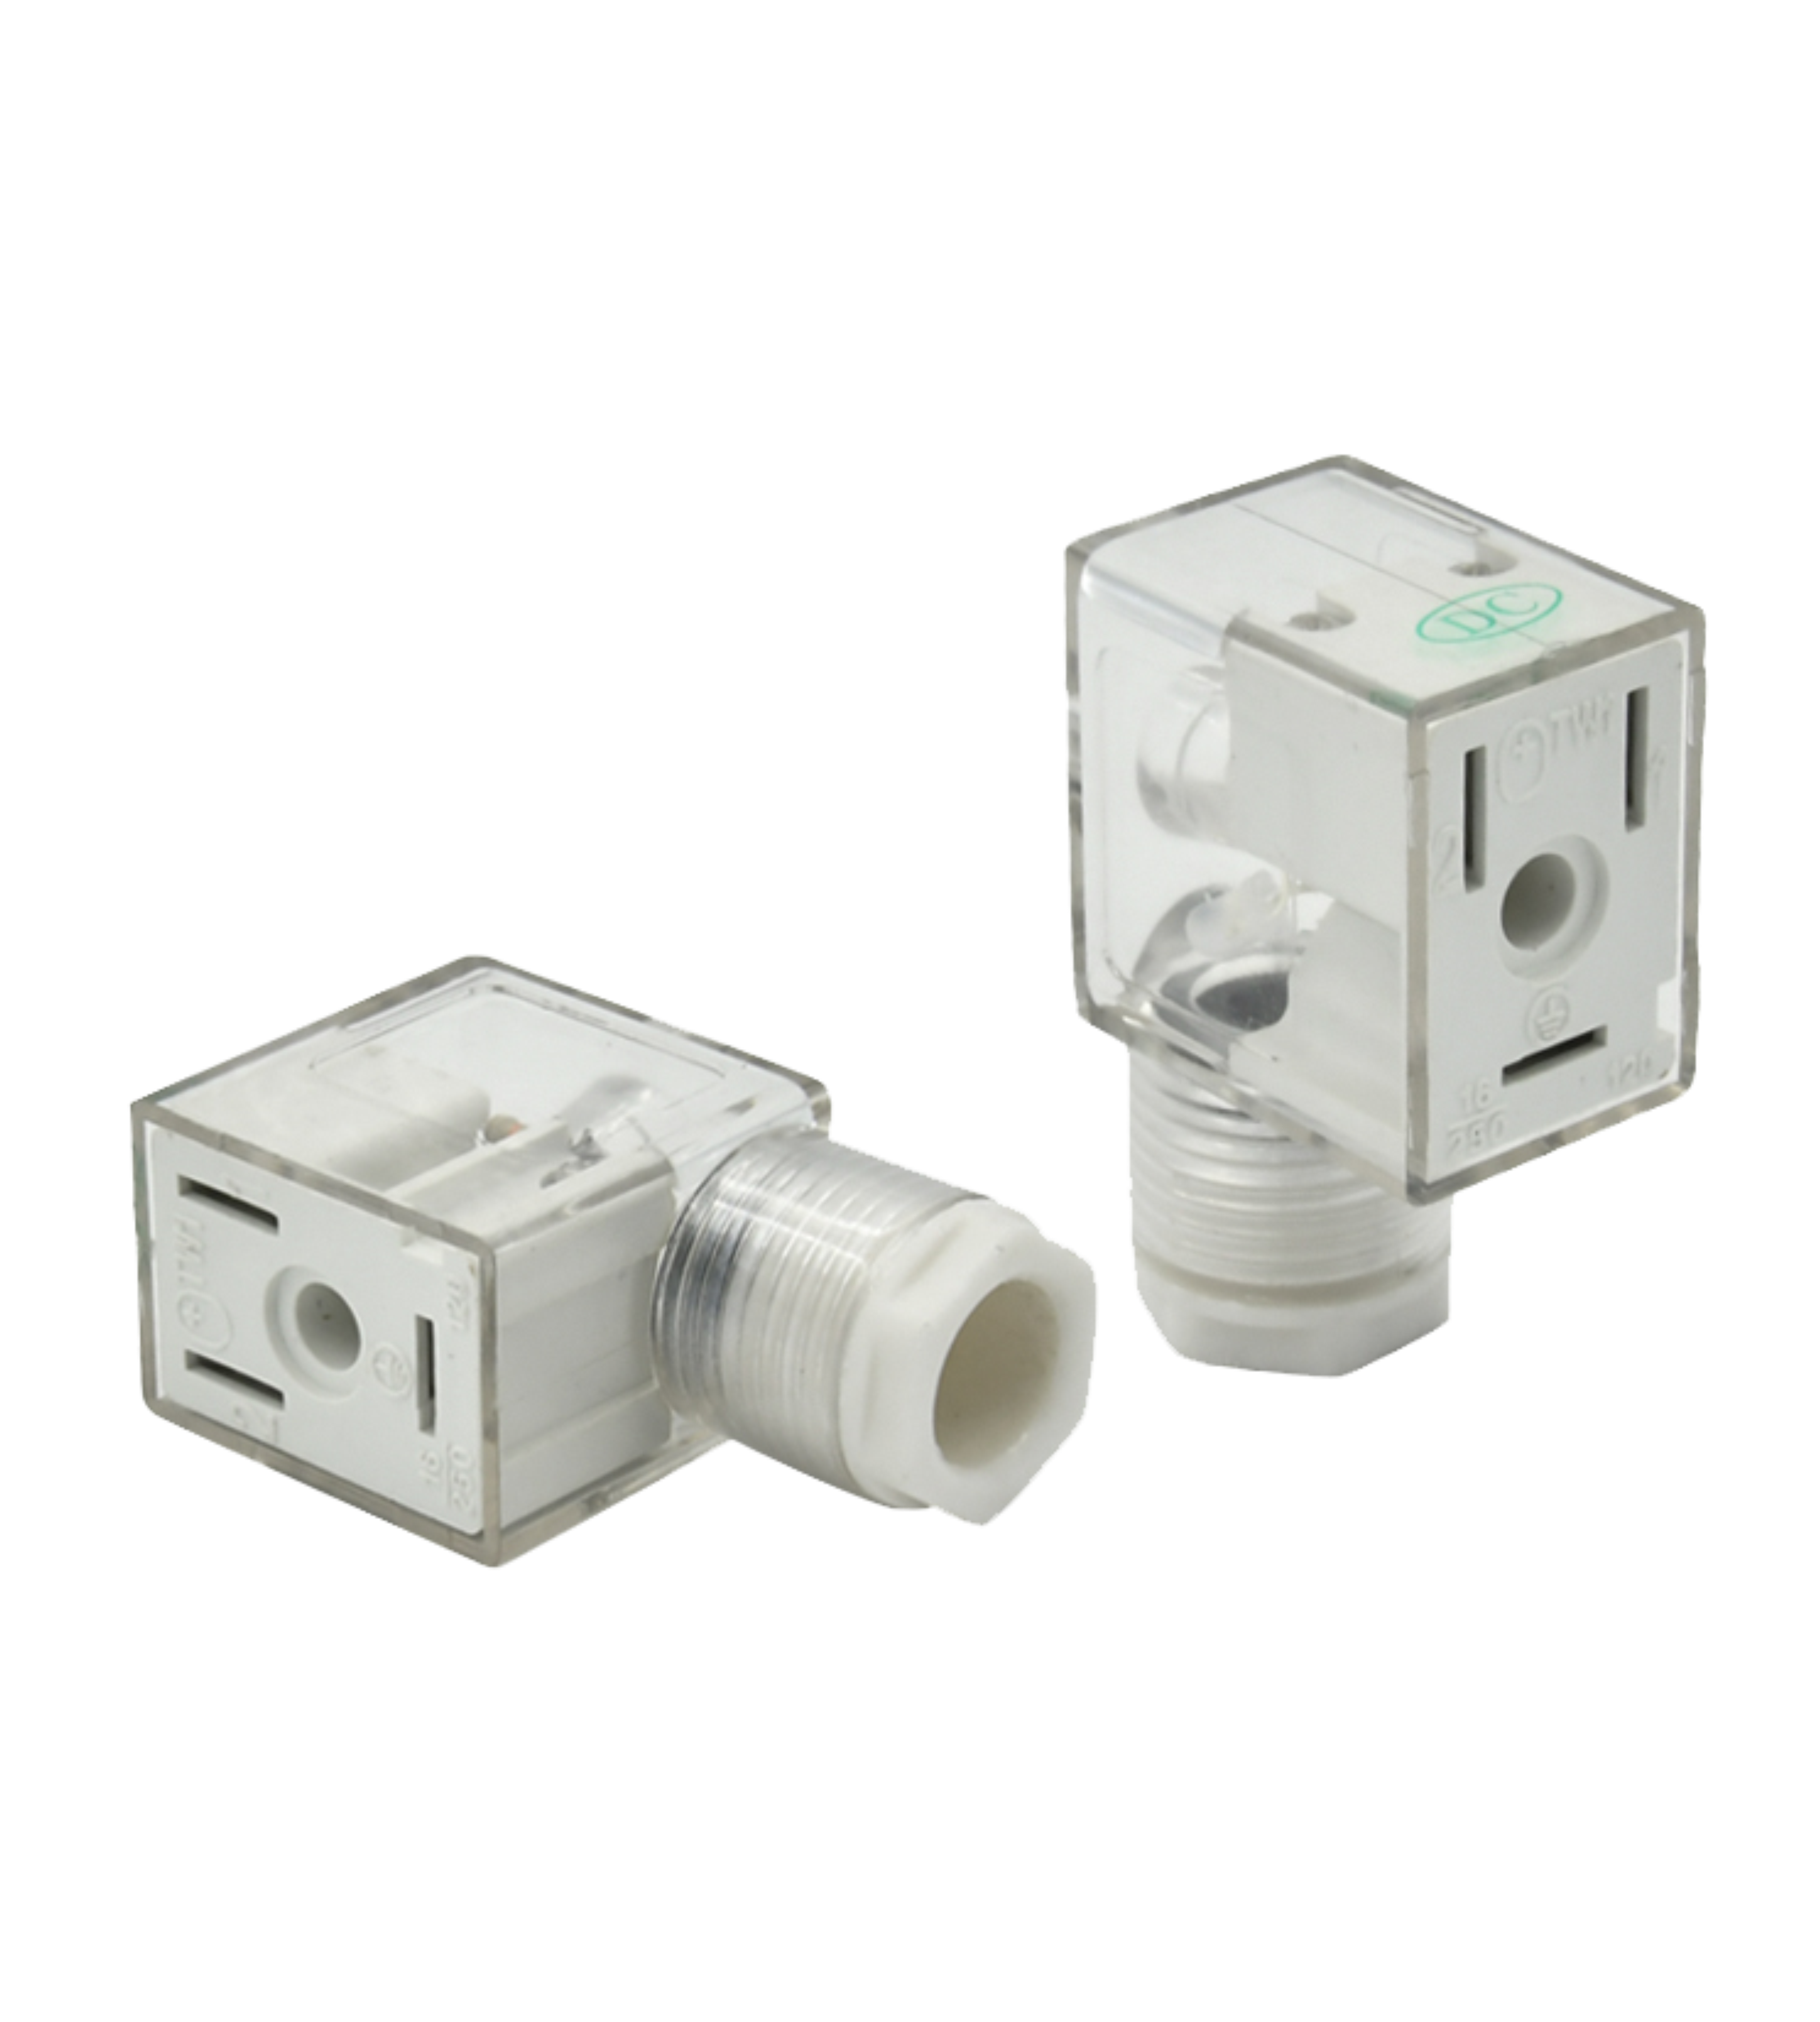 Rigoal's High-Quality Solenoid Valve Connector for Industrial Applications